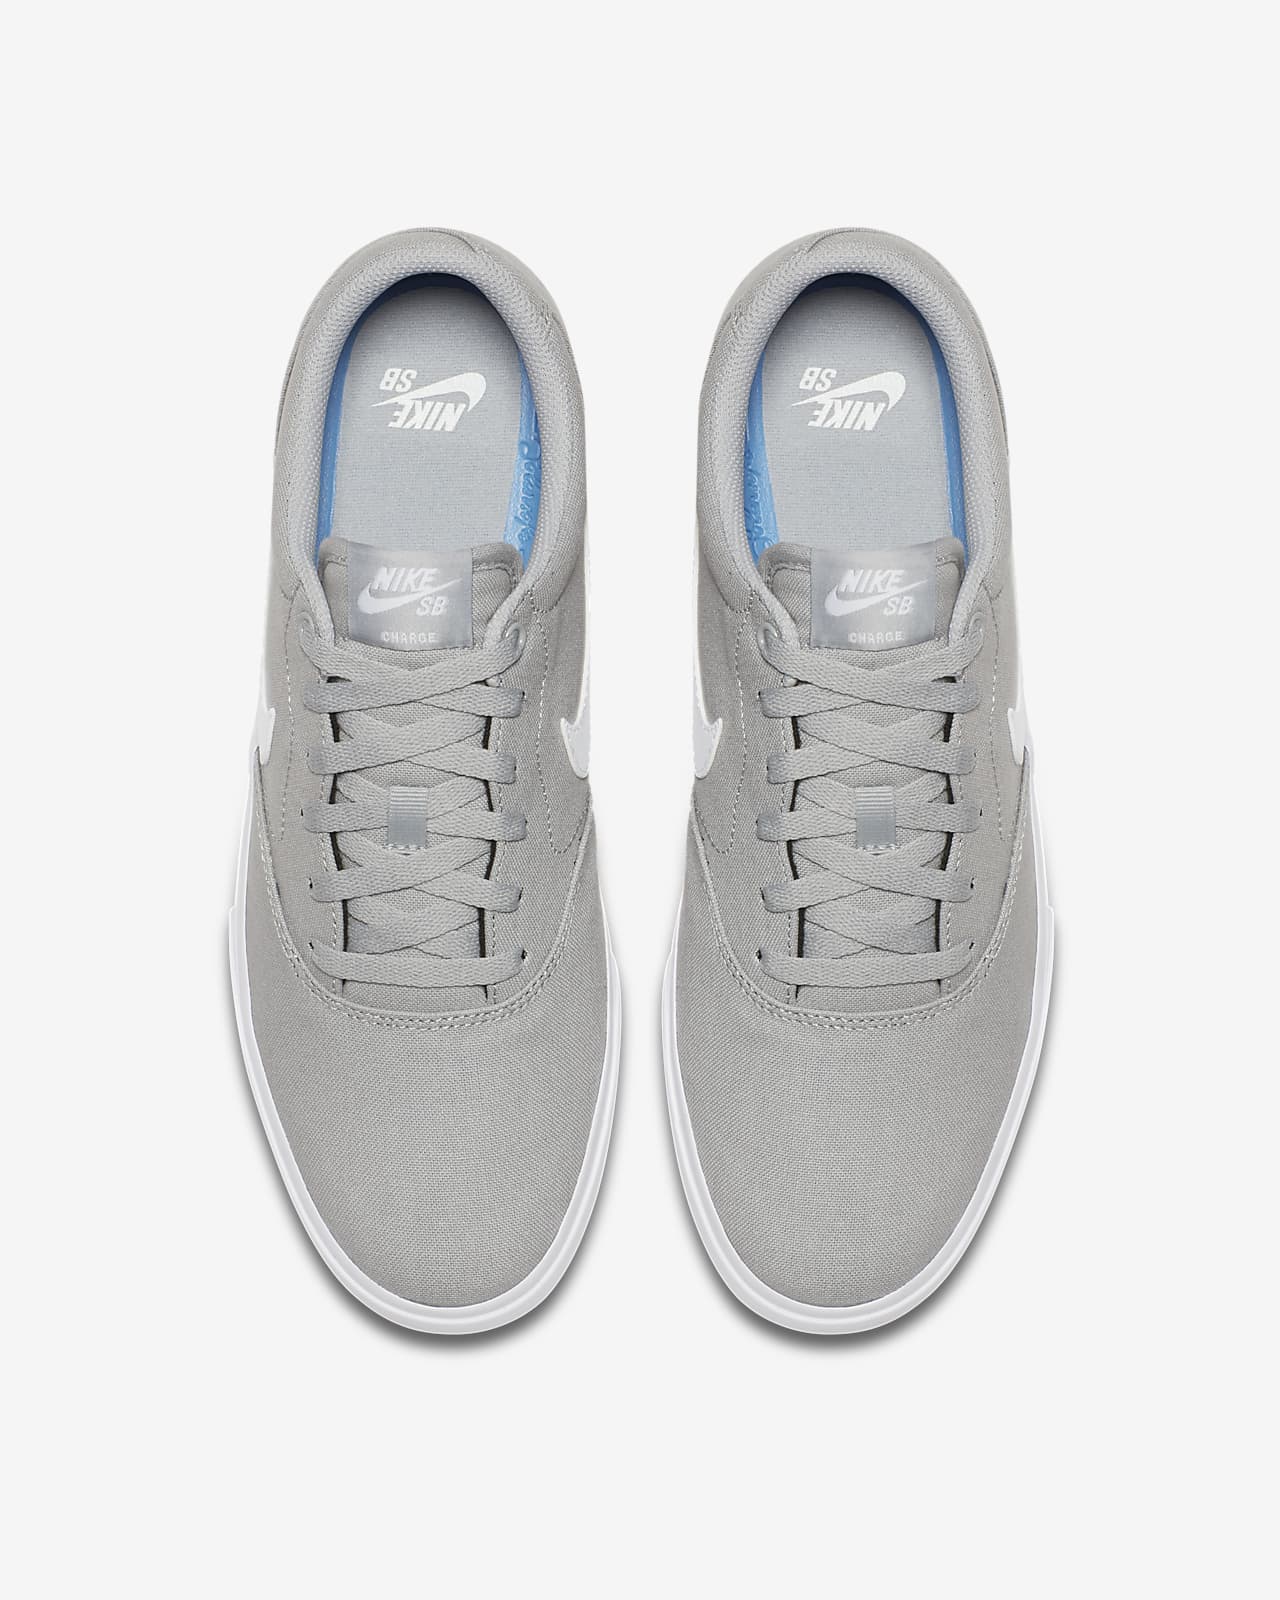 women's nike sb charge canvas skate shoes